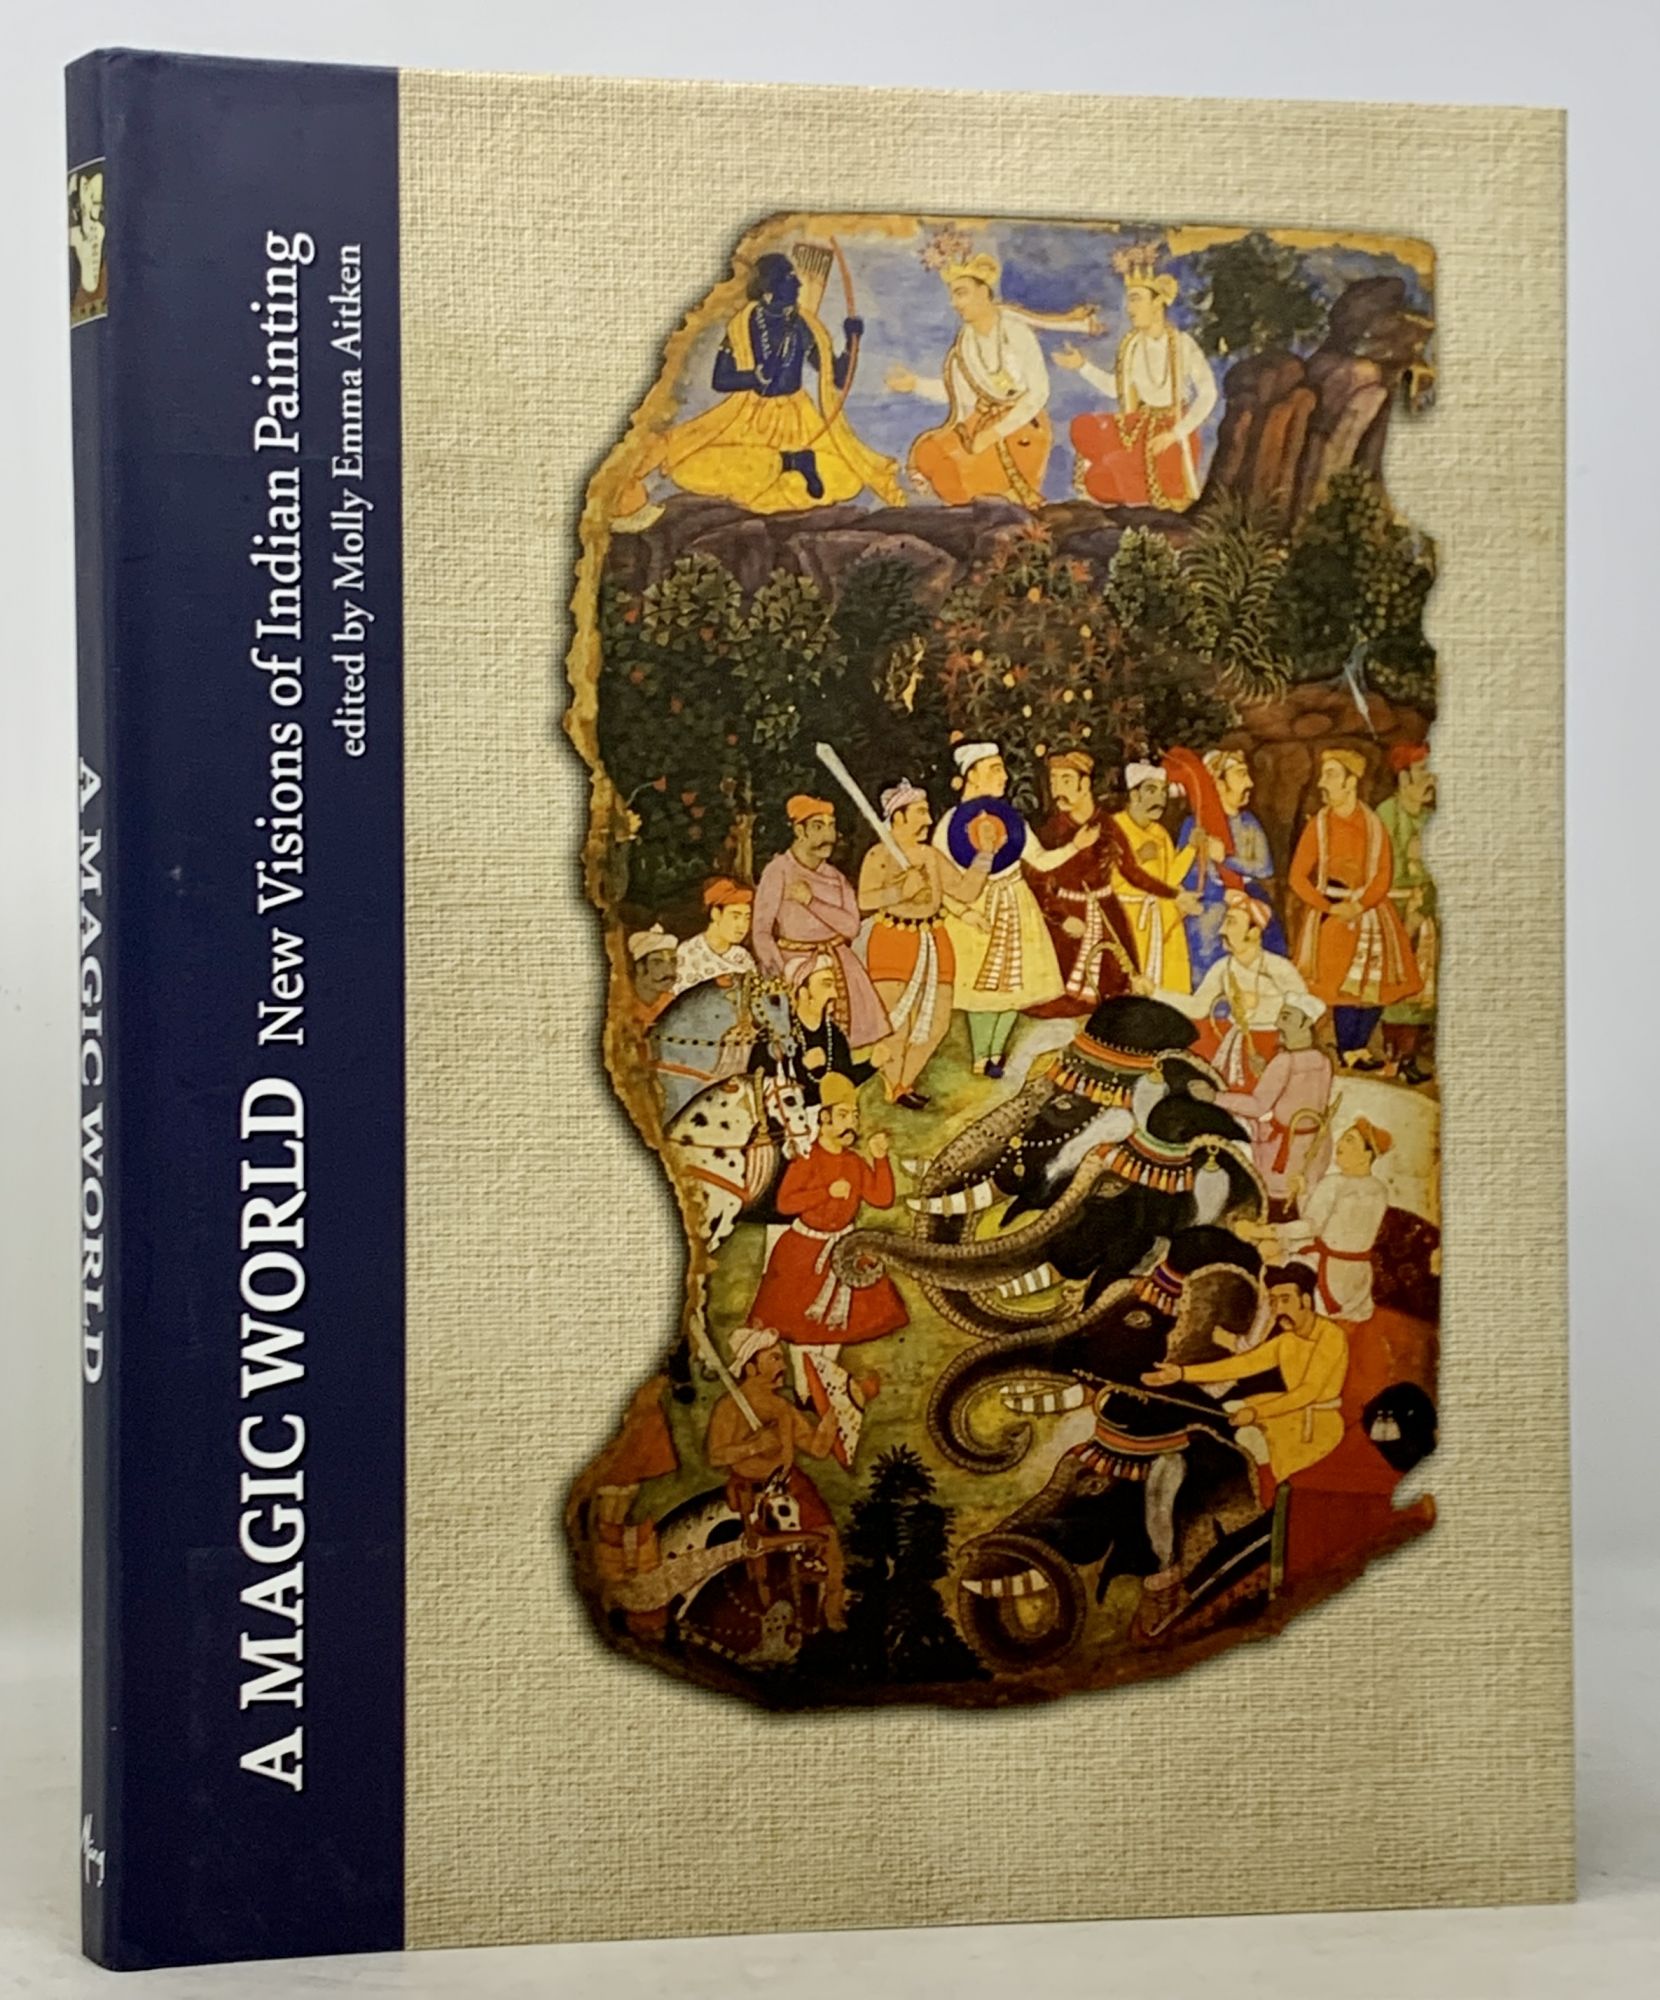 Aitken, Molly Emma - Editor - A MAGIC WORLD. New Visions of Indian Painting